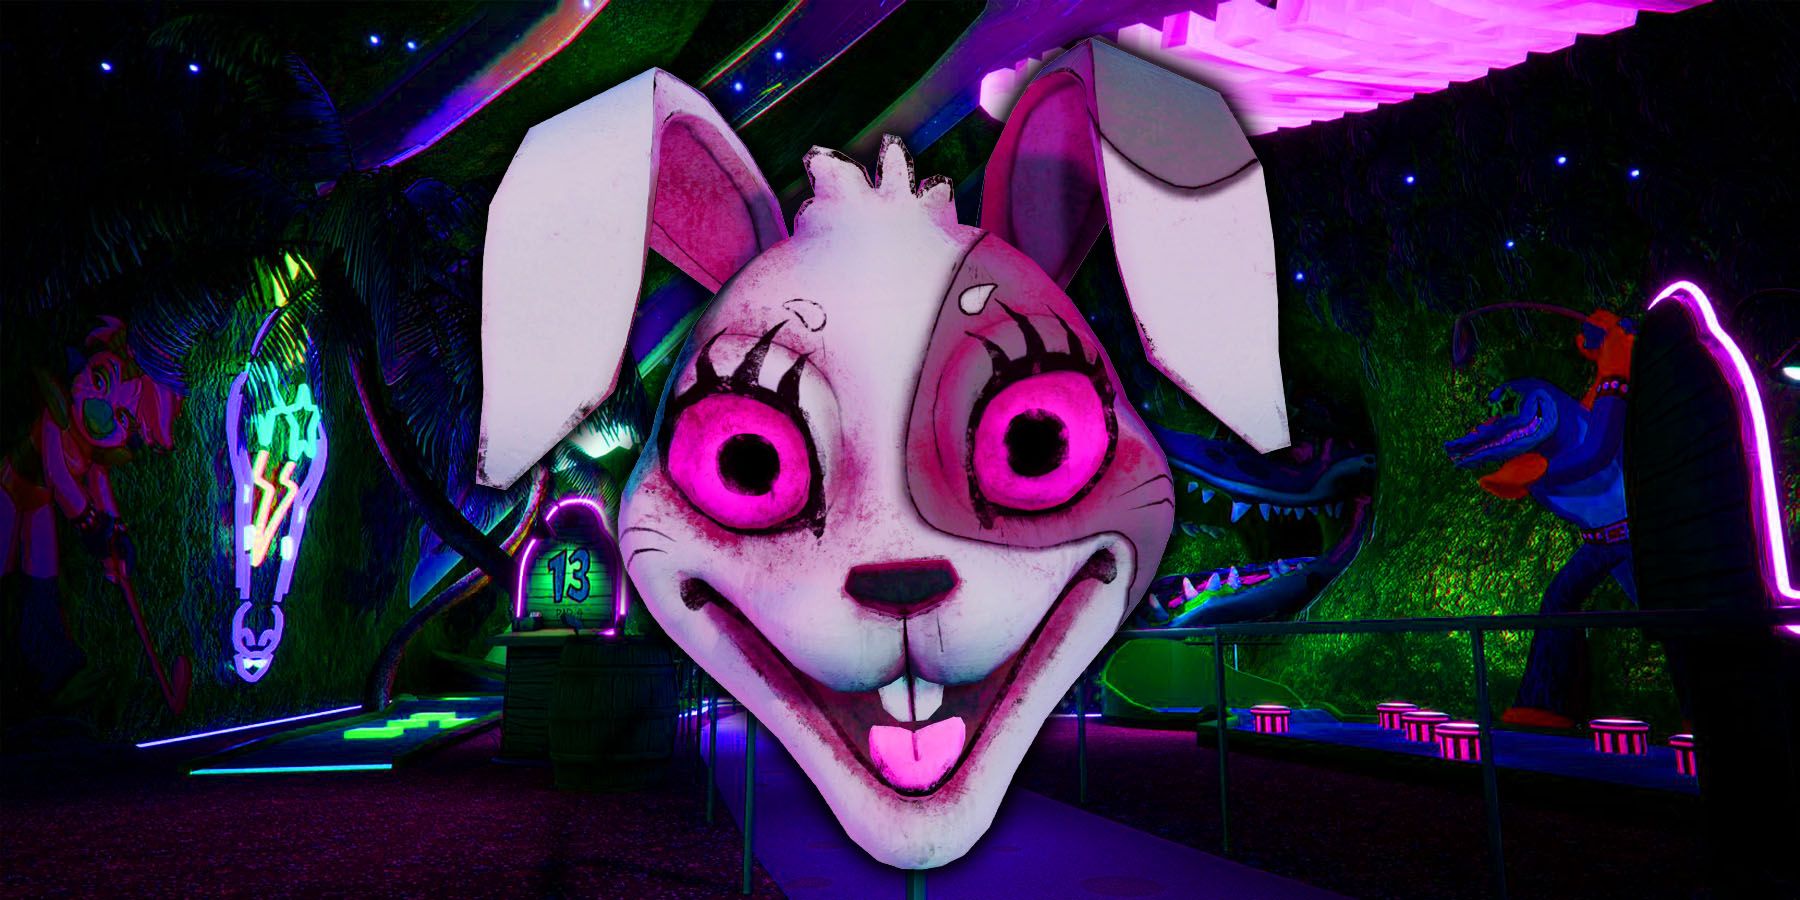 Five Nights at Freddy's: Security Breach Ruin DLC's Mission is Already Clear